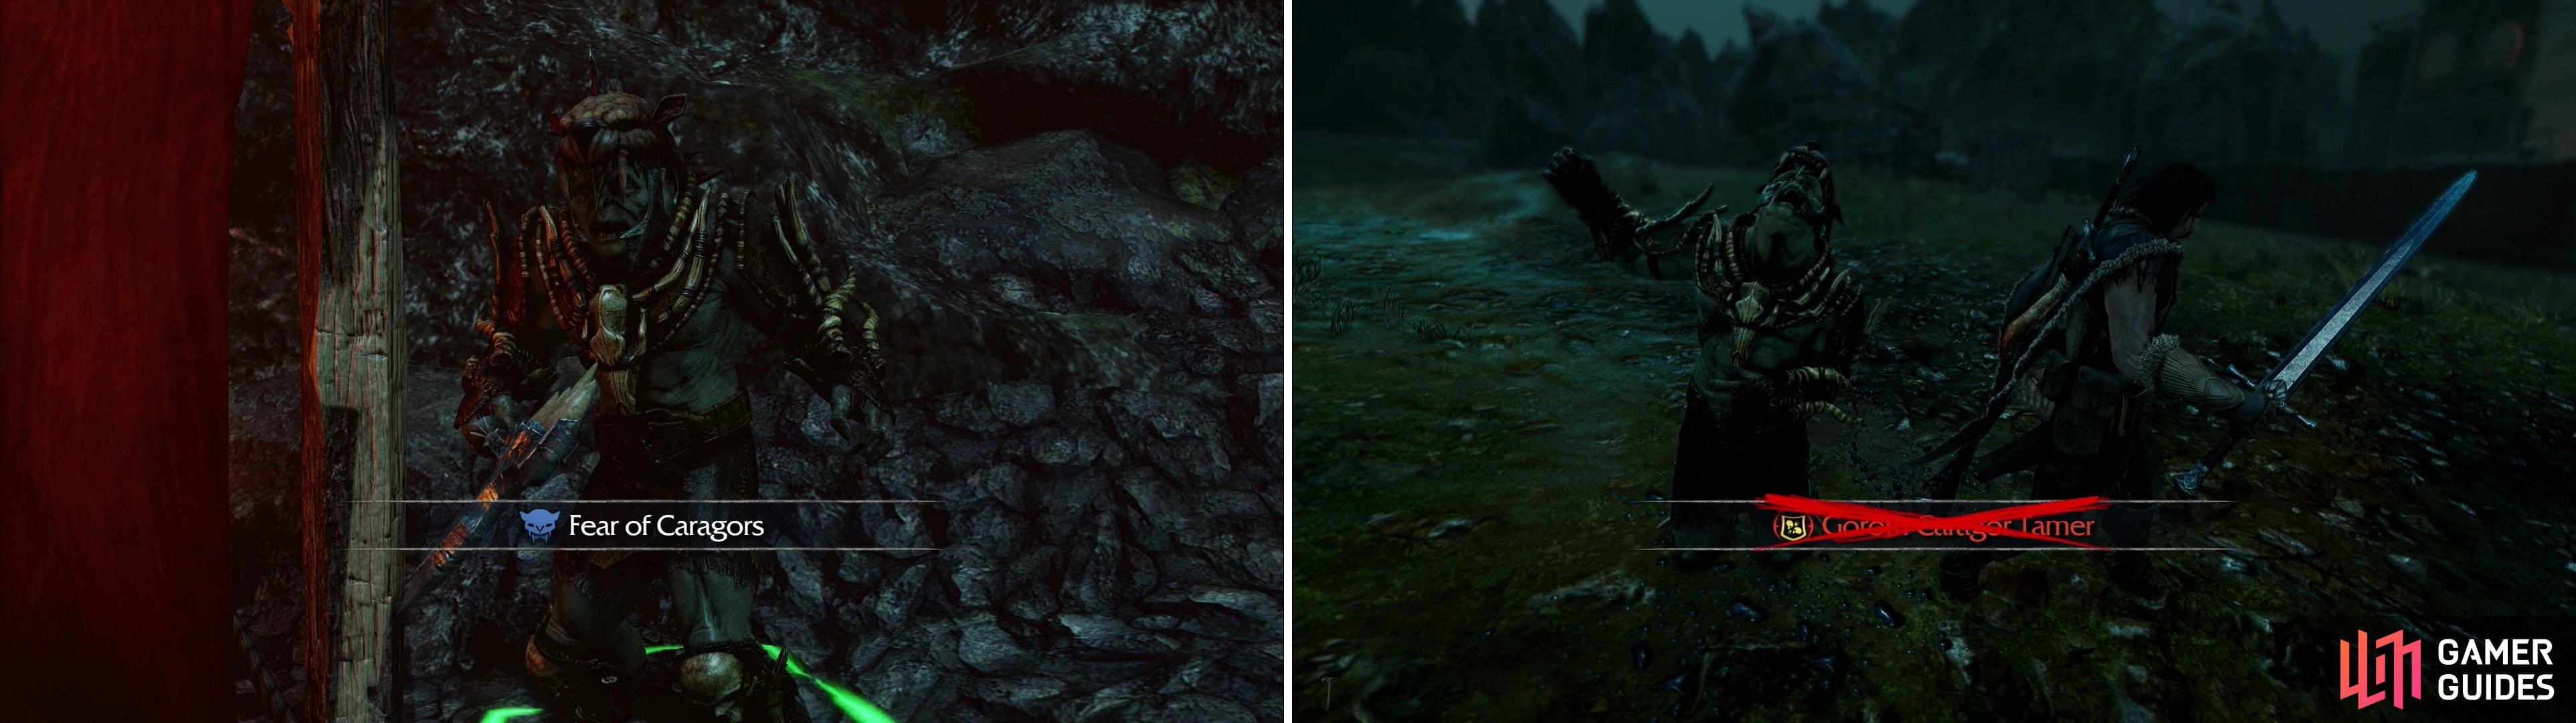 Release a caged Caragor to take advantage of Goroth's fear of them (left), after which he should be easy to dispatch (right).